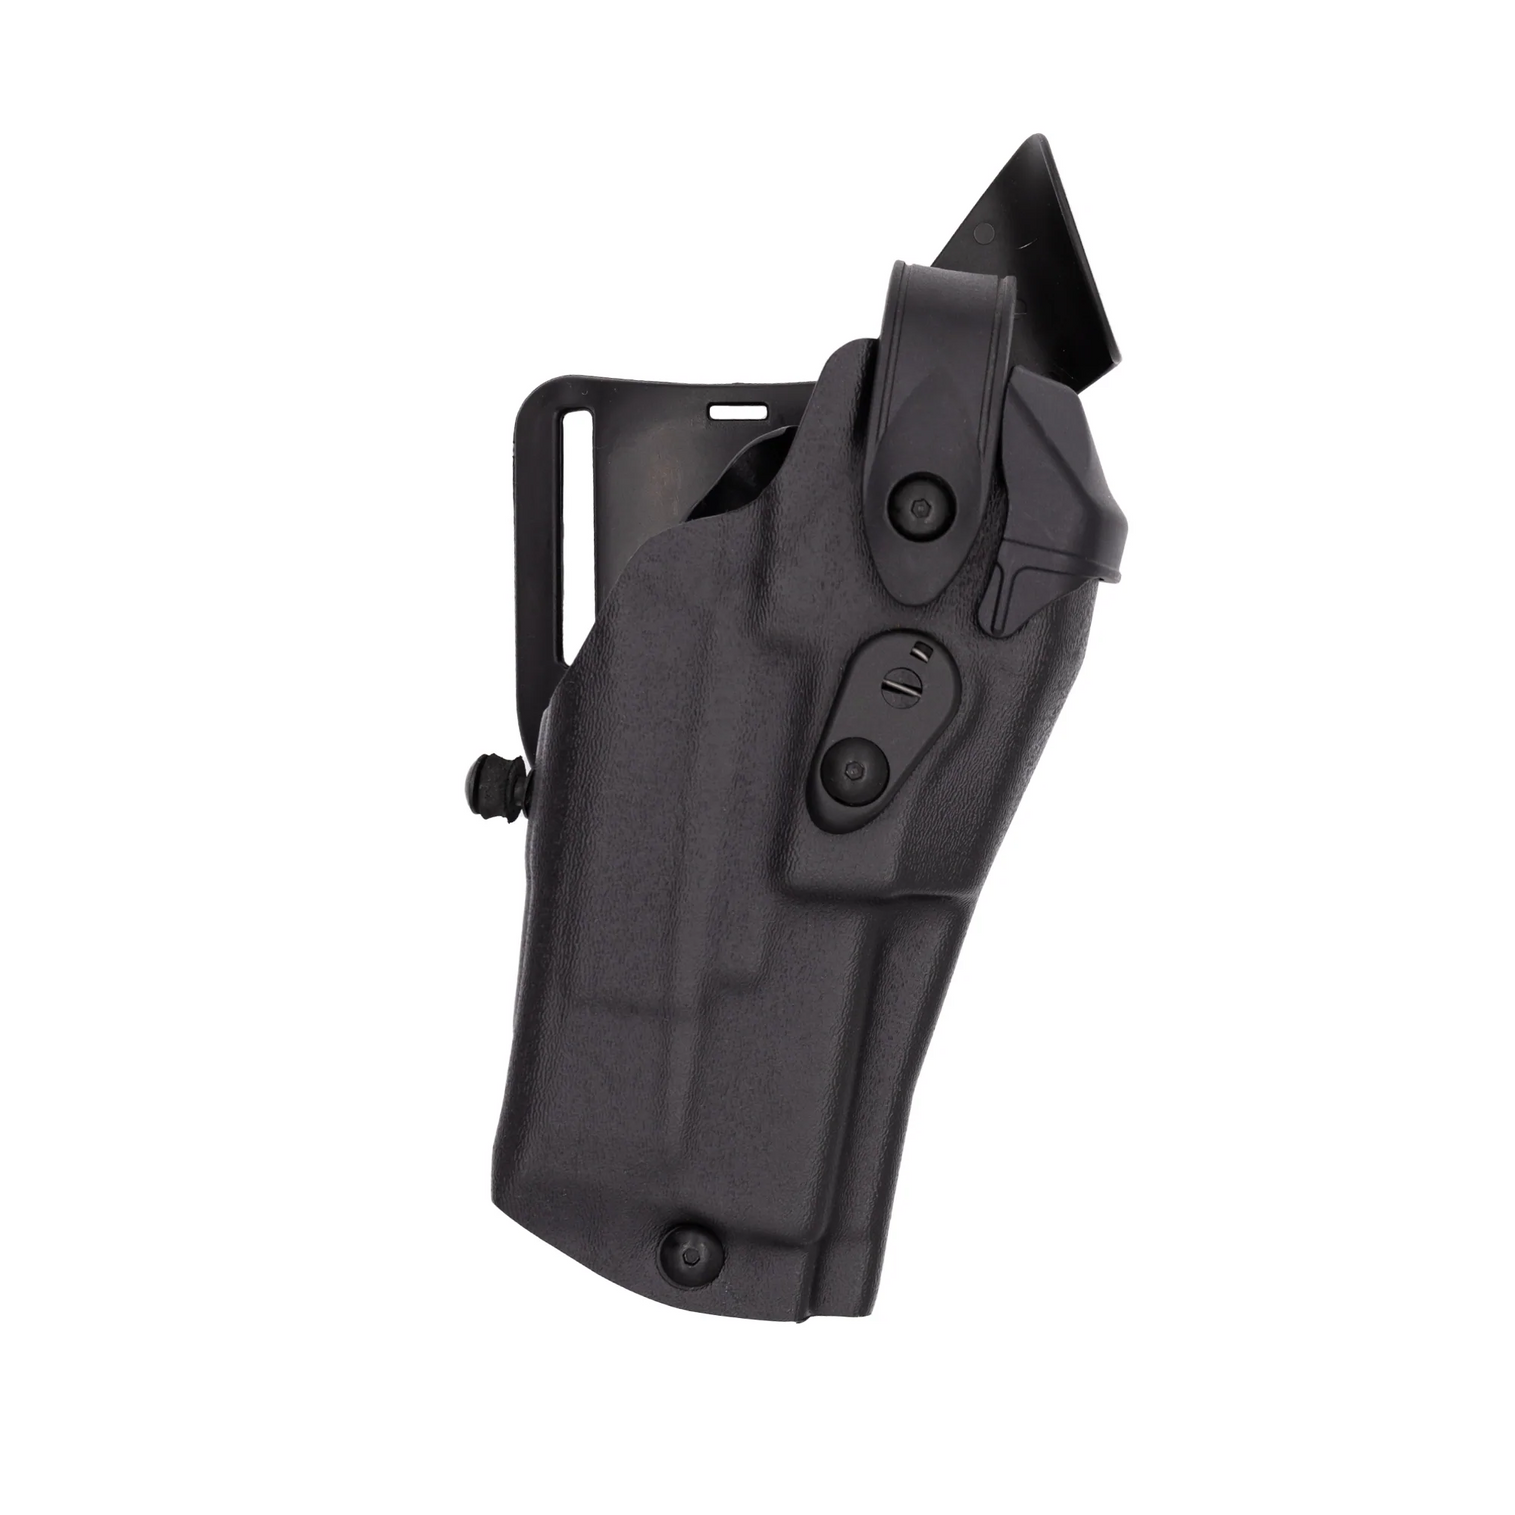 Model 6360rds Als/sls Mid-ride, Level Iii Retention Duty Holster For Sig Sauer P320 Rx 9 W/ Light - KR6360RDS-4502-411